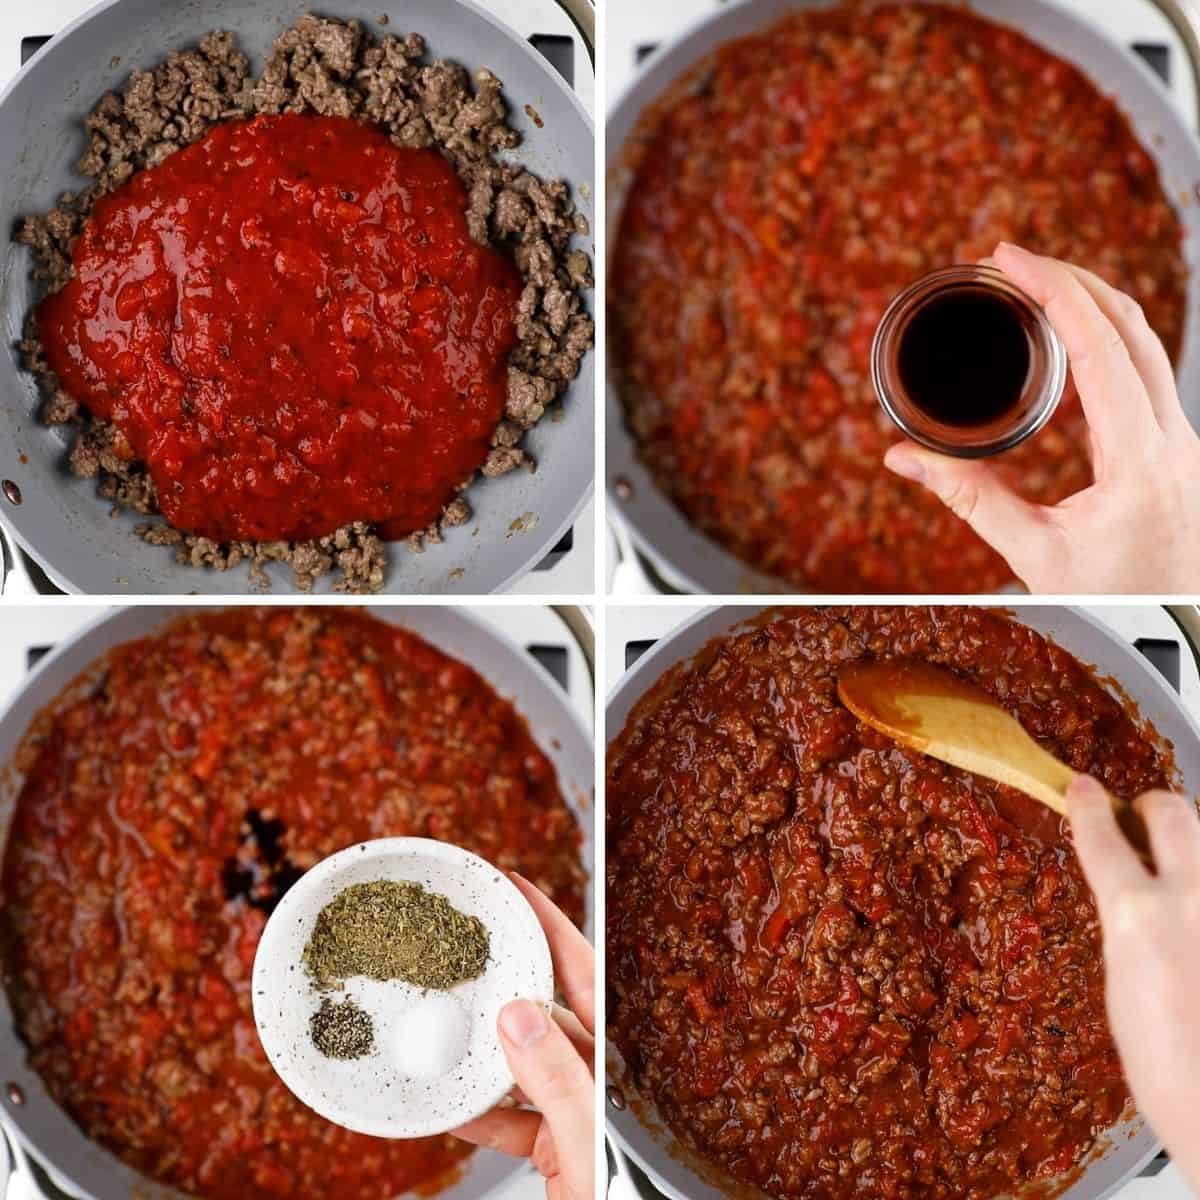 Process photos of adding ingredients to a skillet to make goulash.